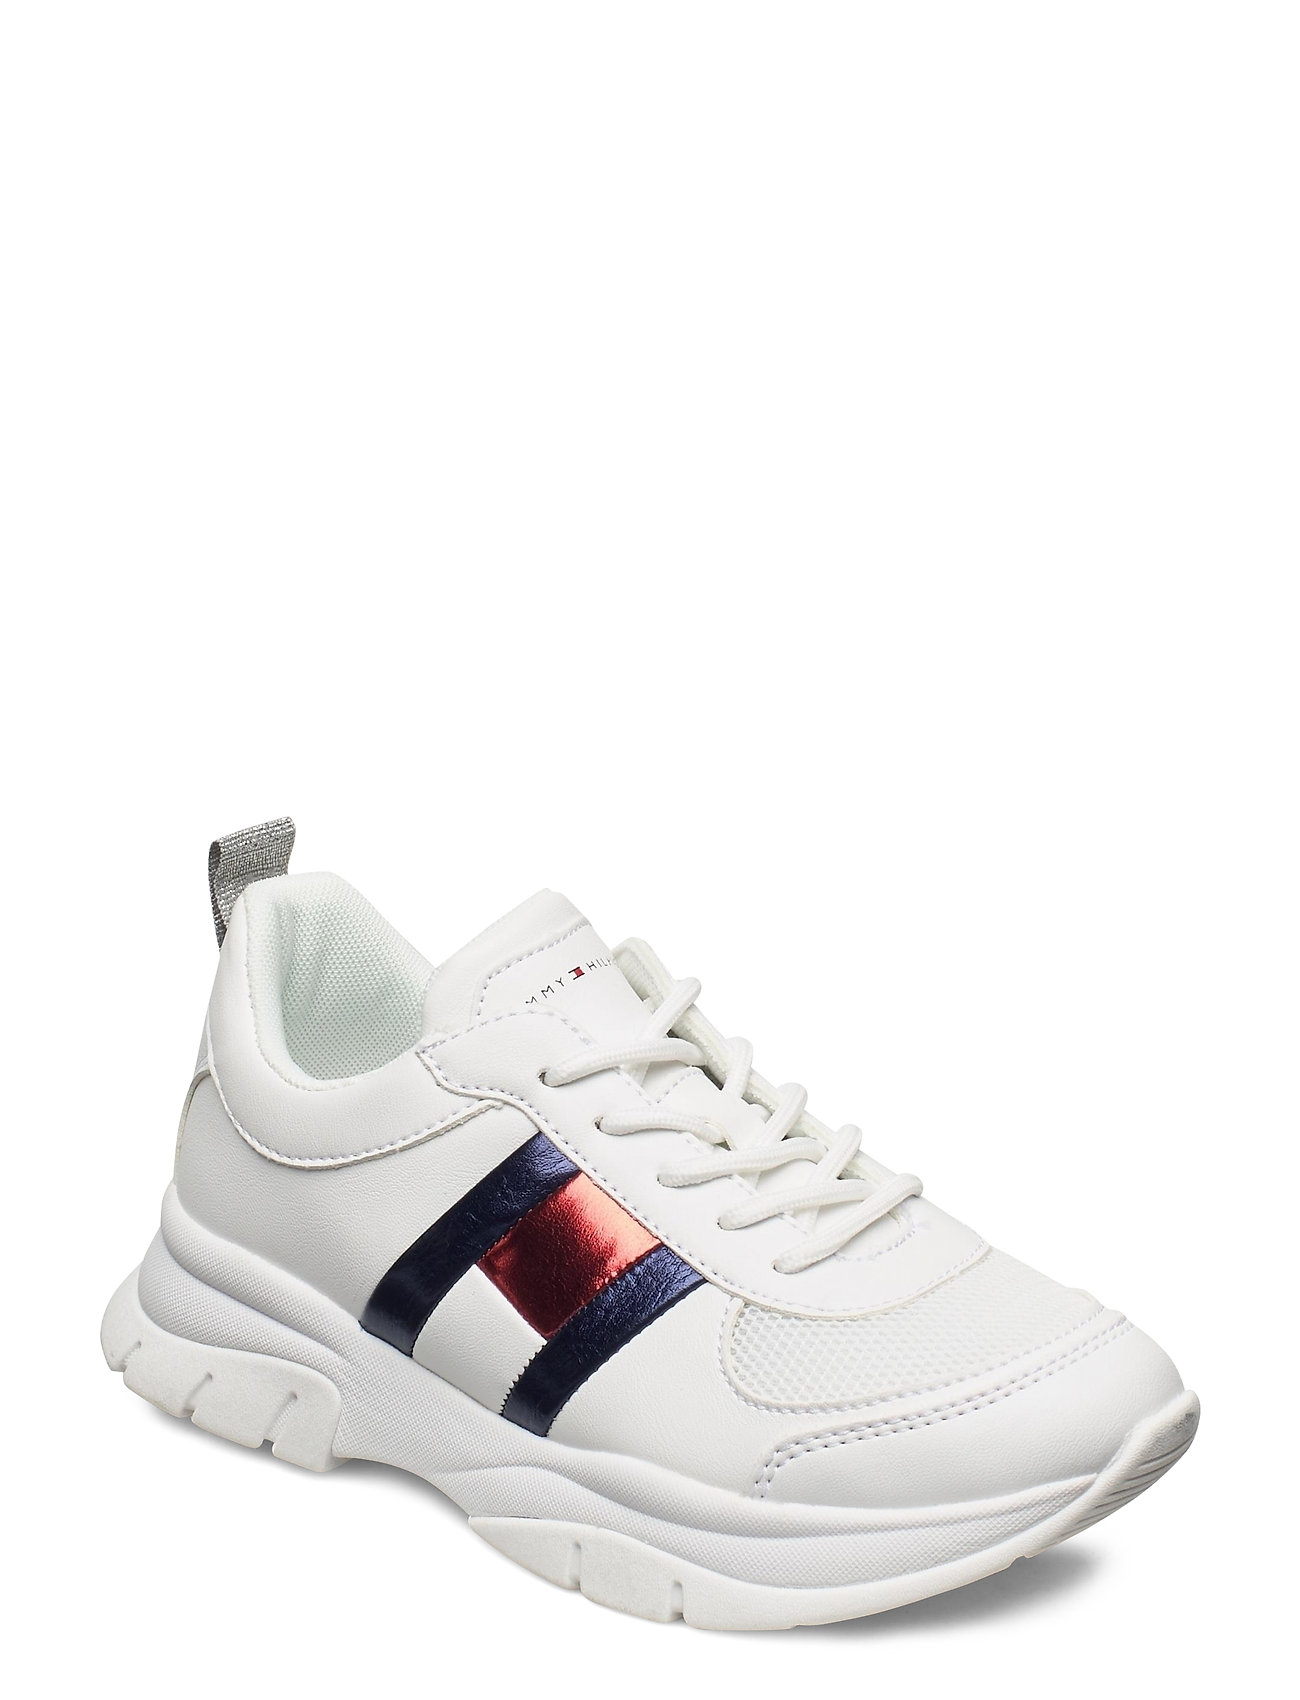 Low Low Tommy Hilfiger - Lace-up Sneaker Tops Cut